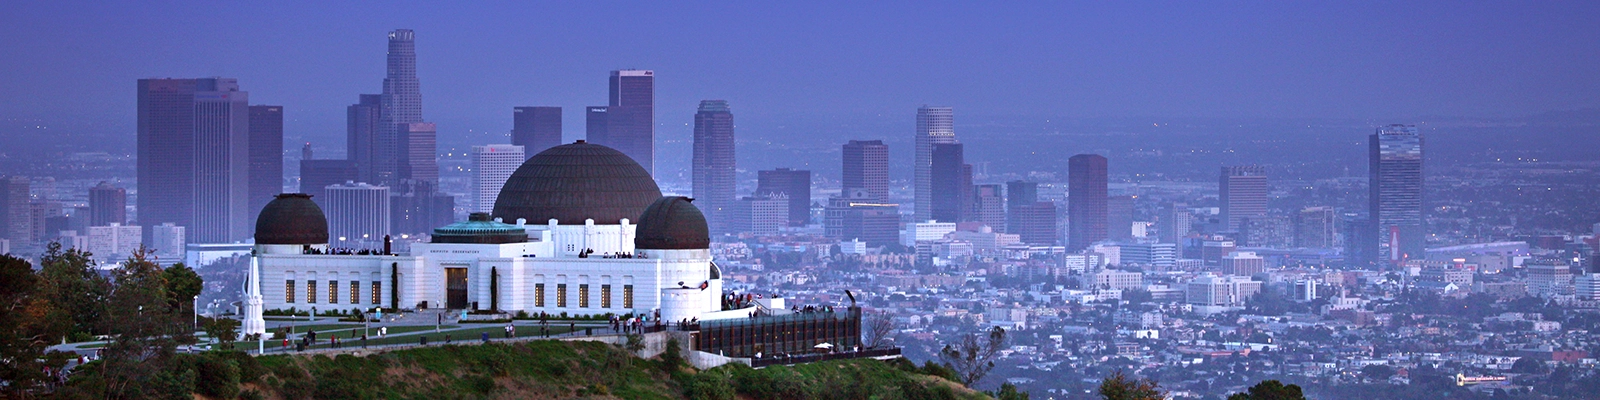 A stunning view of Griffith Observatory, an iconic Los Angeles landmark, situated atop a hill with a beautiful cityscape backdrop